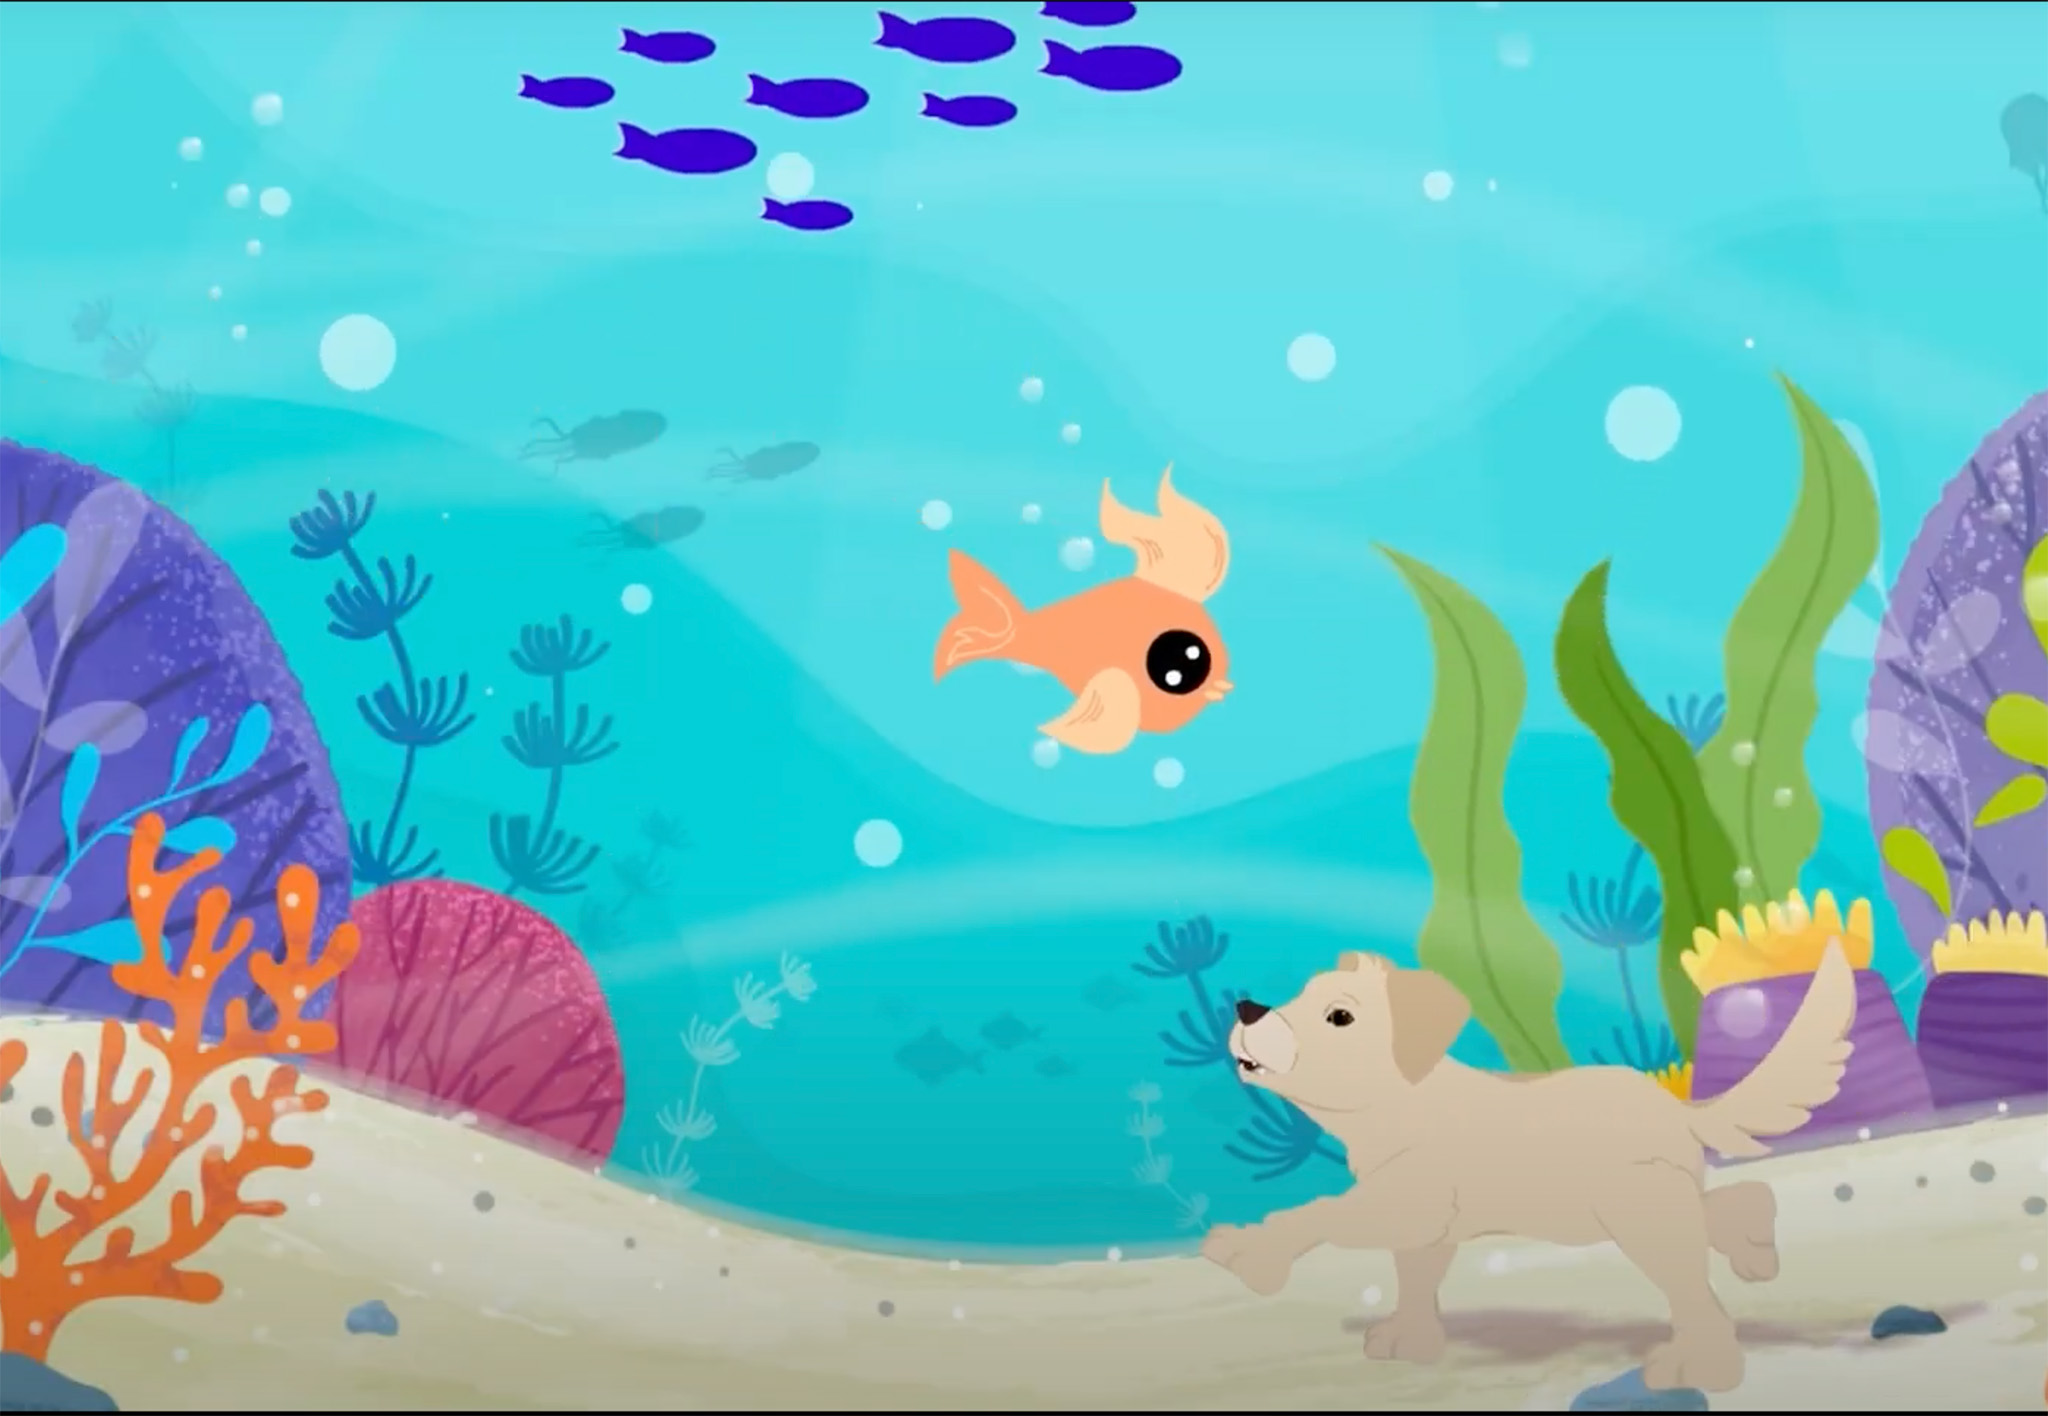 This is a still image from the animated video titled a dog's adventure. The still features a beige cartoon dog talking to a orange fish on a vibrant aquamarine underwater background.